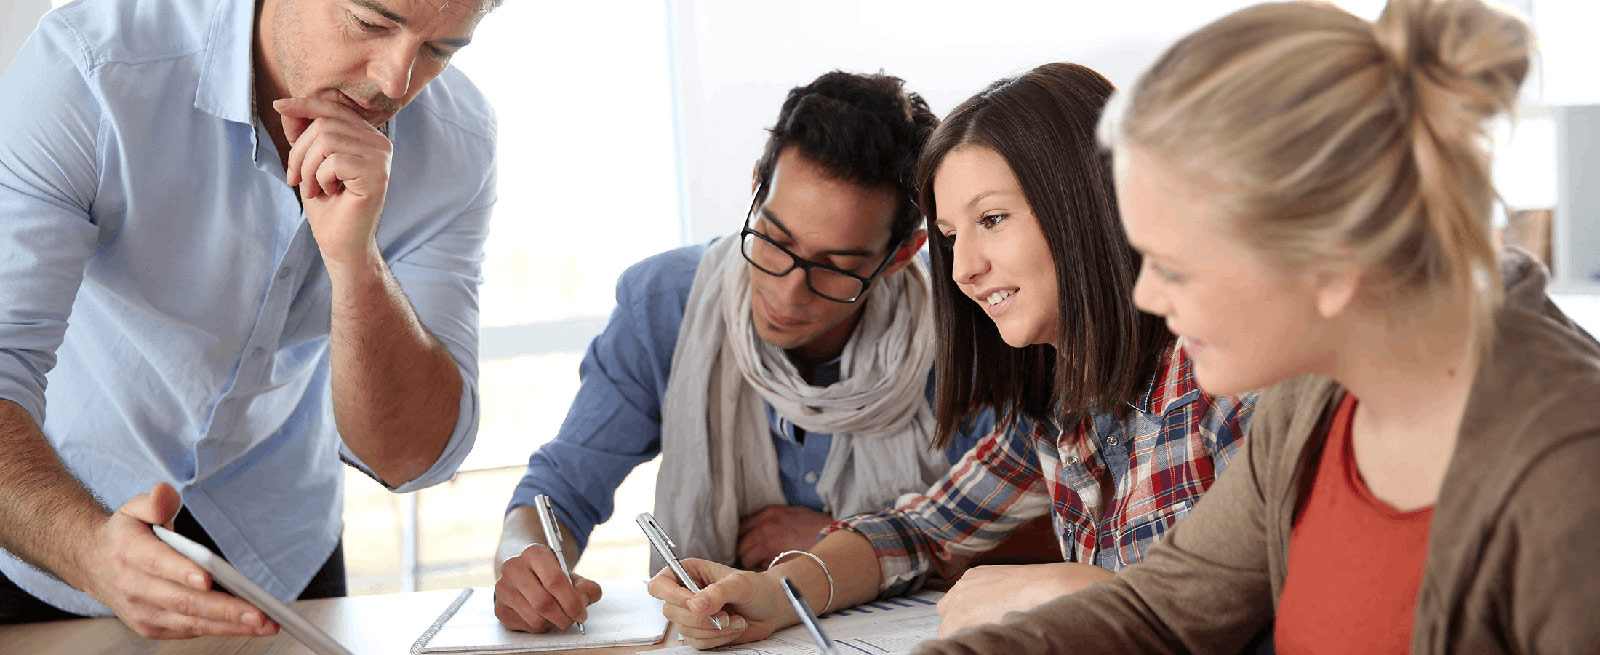 Get Qualified Professional Essay Writing Support Easily